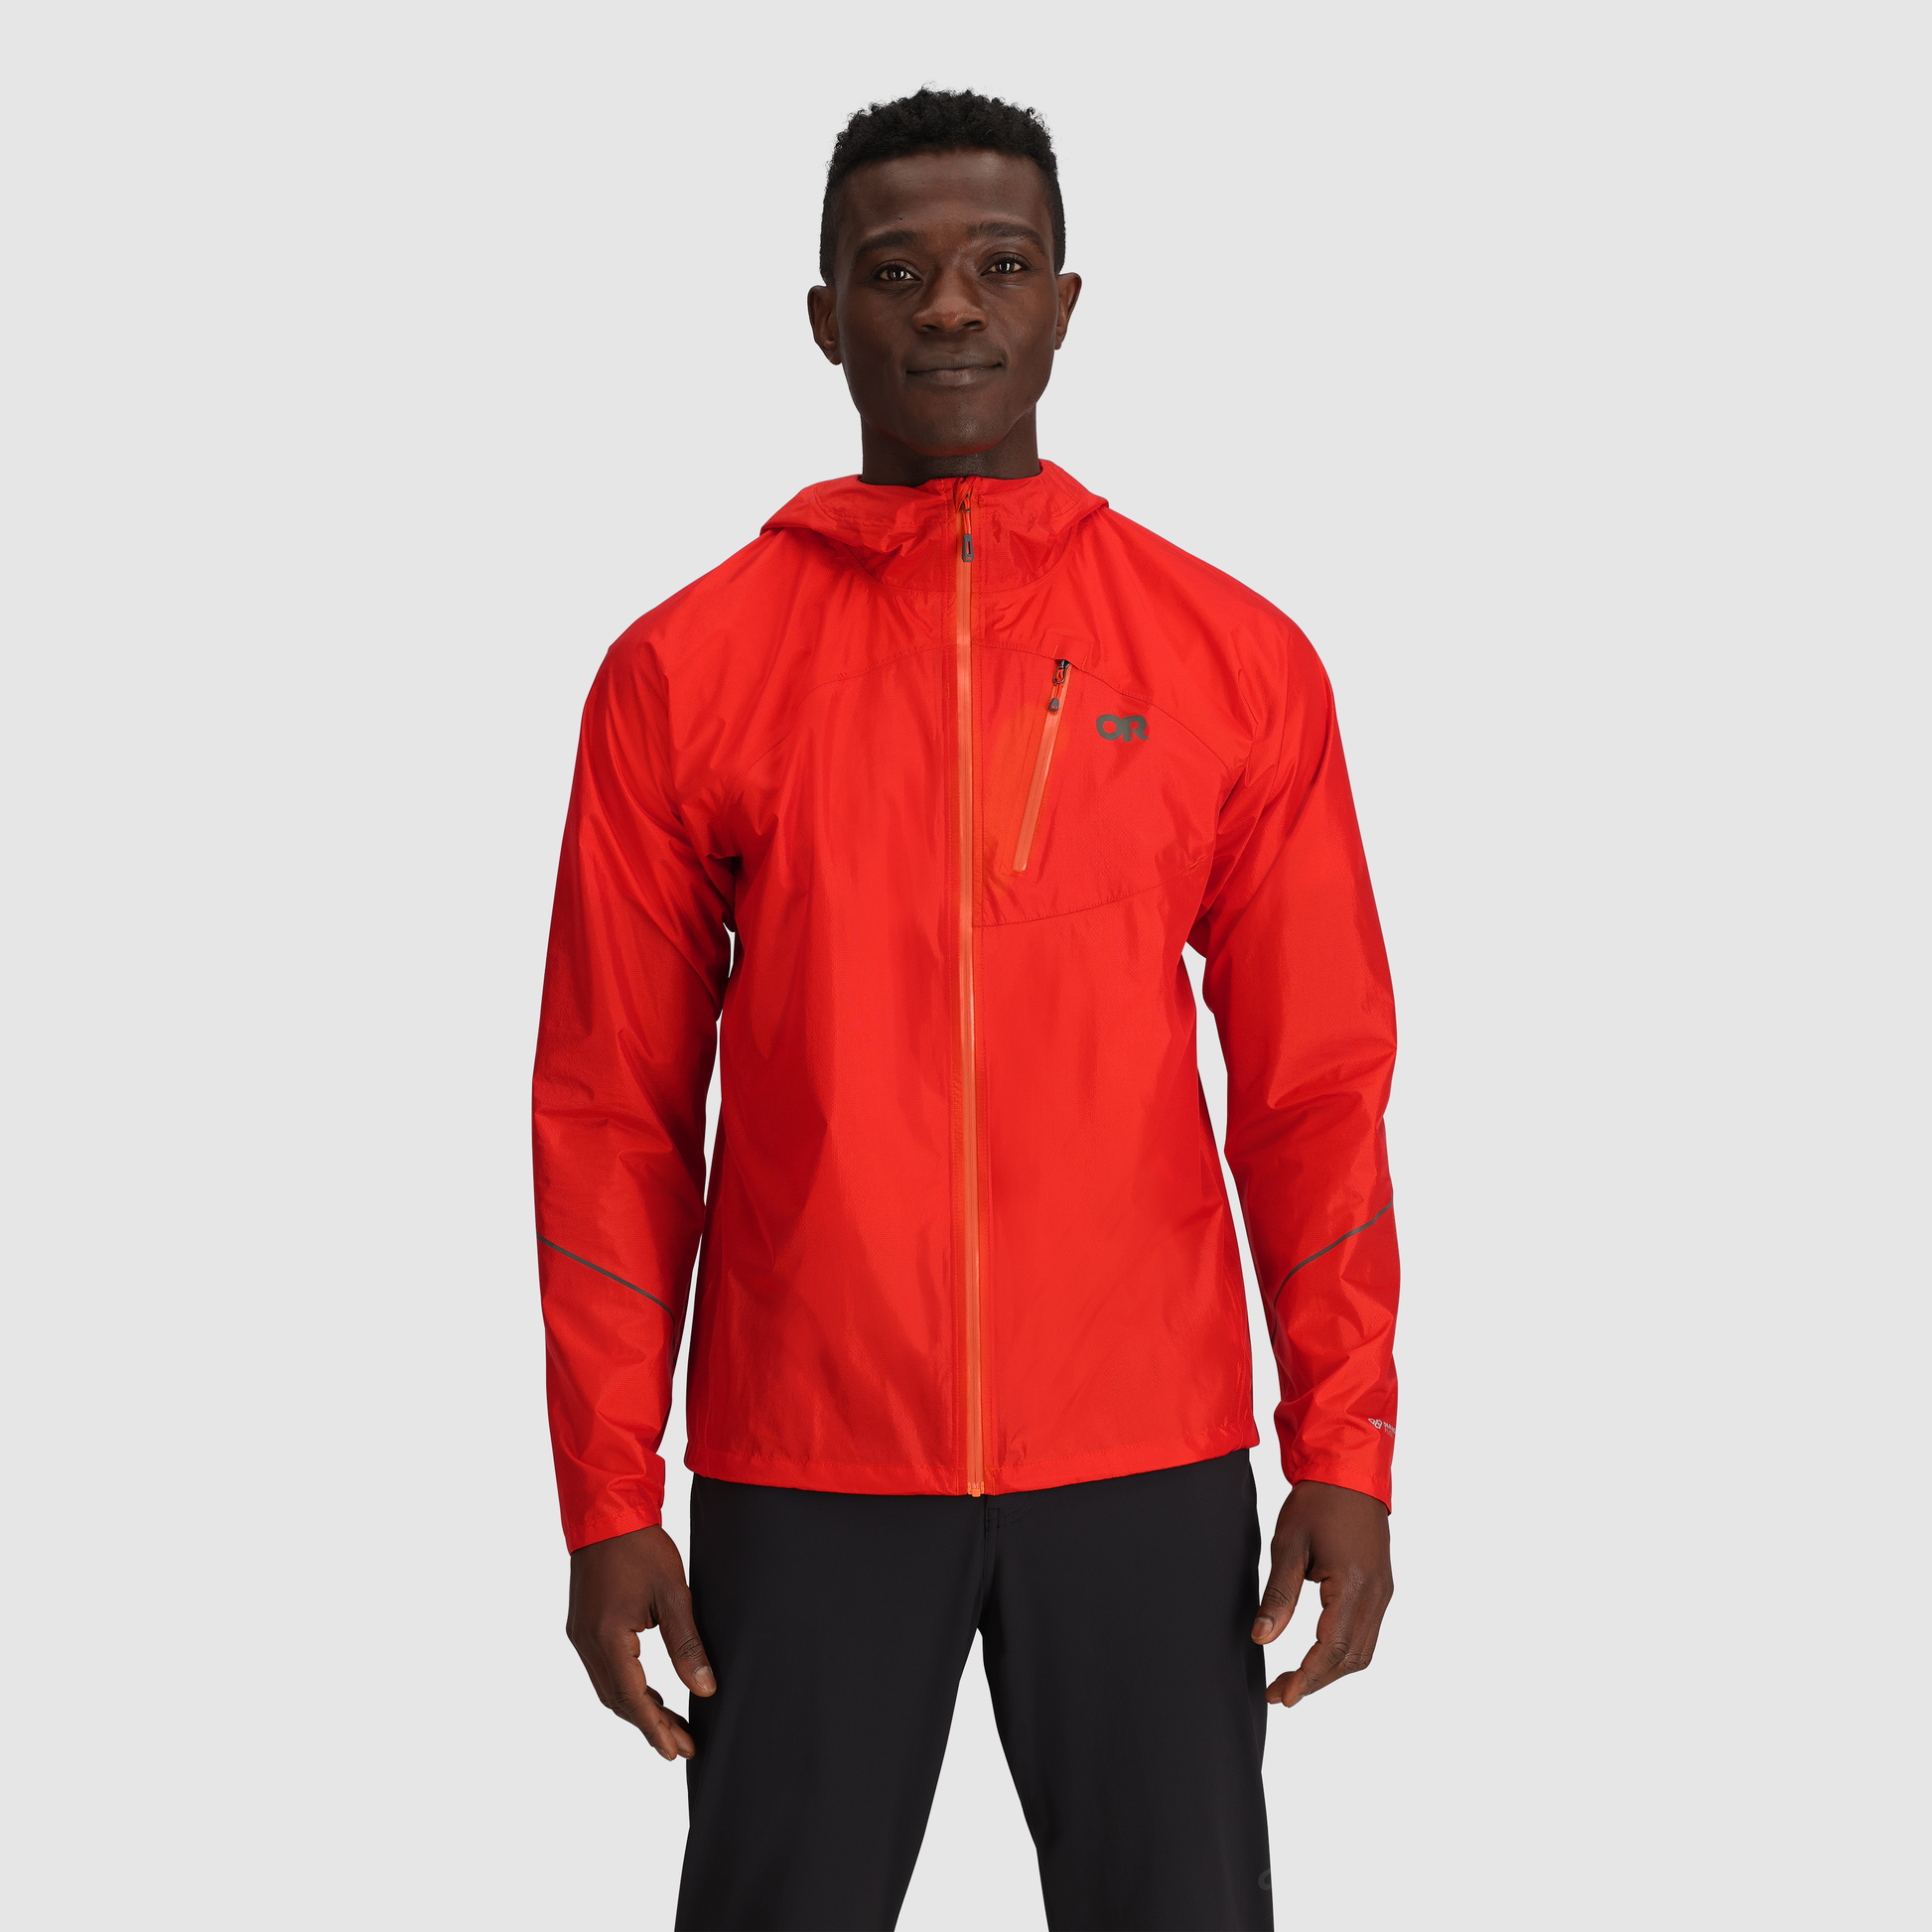 Under Armour Raincoats for Men for Sale, Shop New & Used